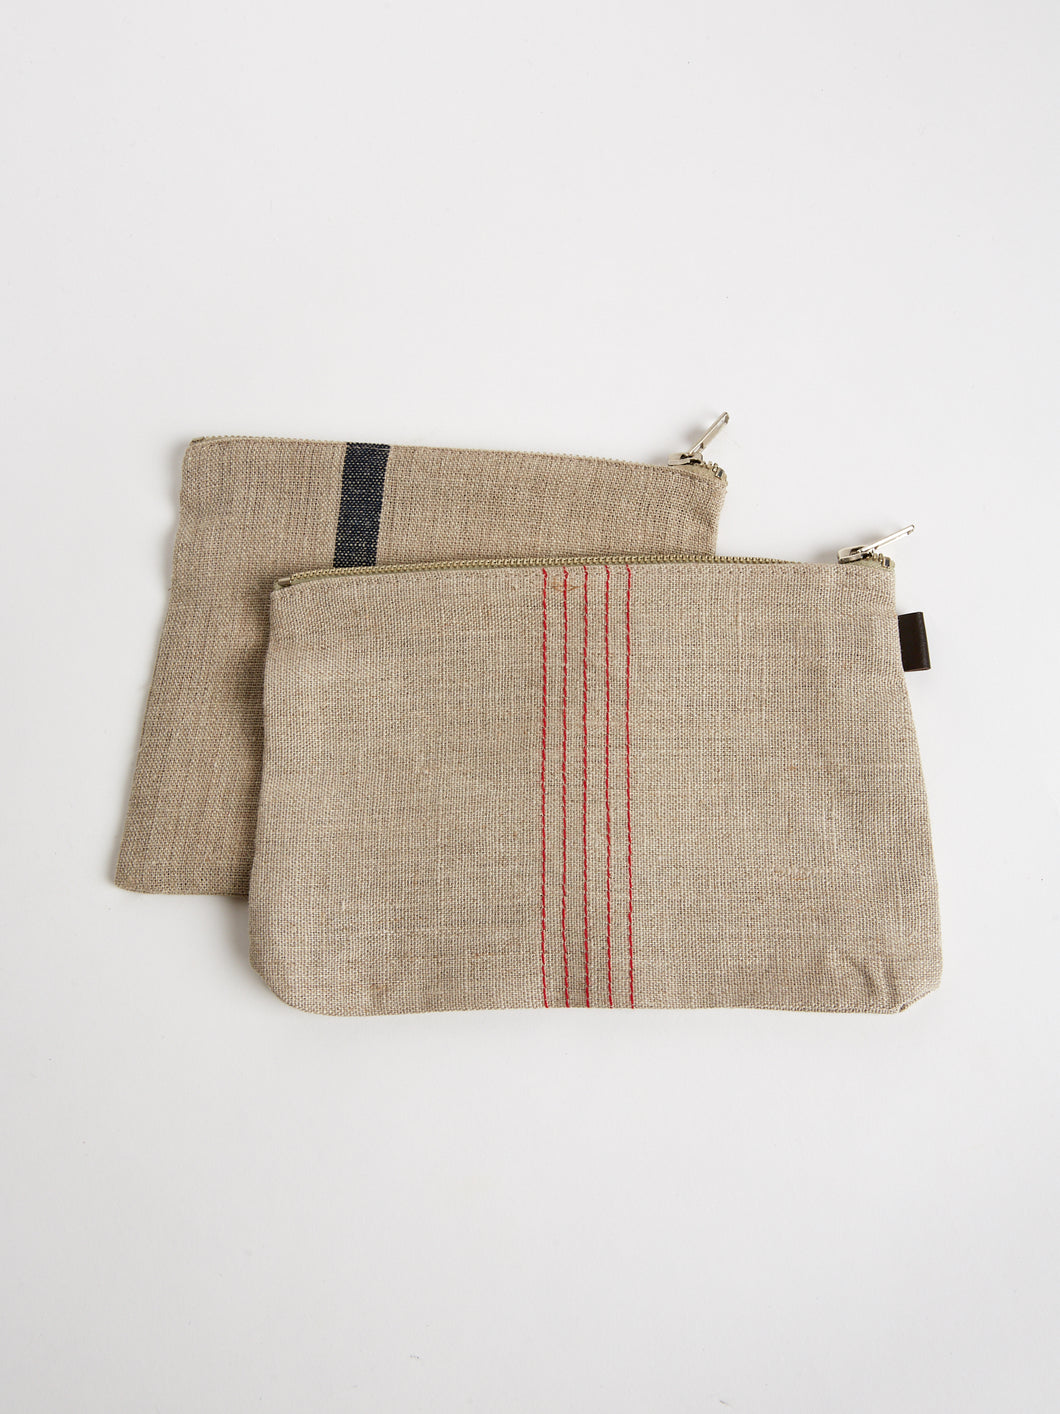 Linen Pouch in Natural and Red